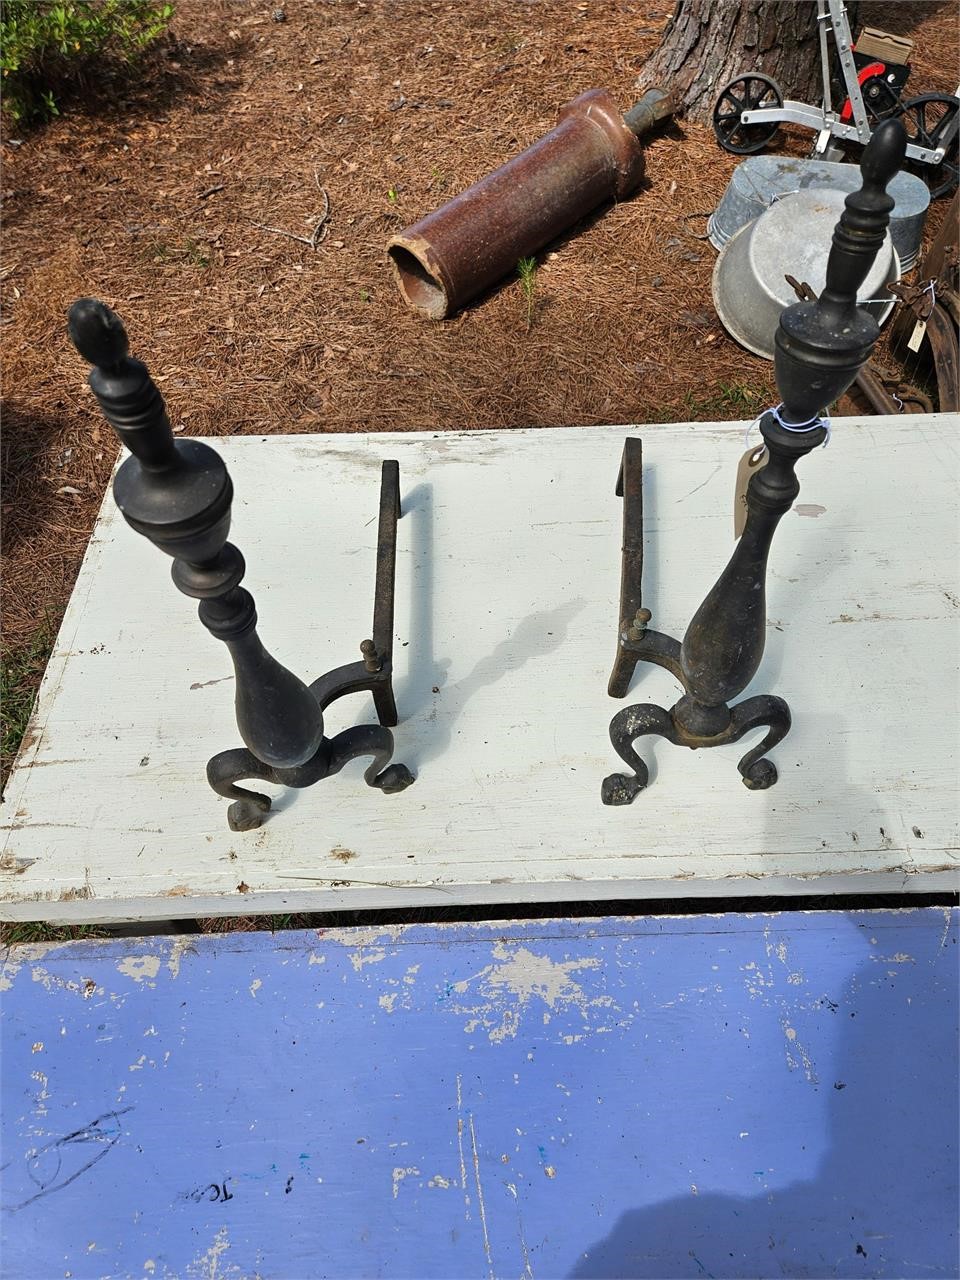 Old Fire Dog irons